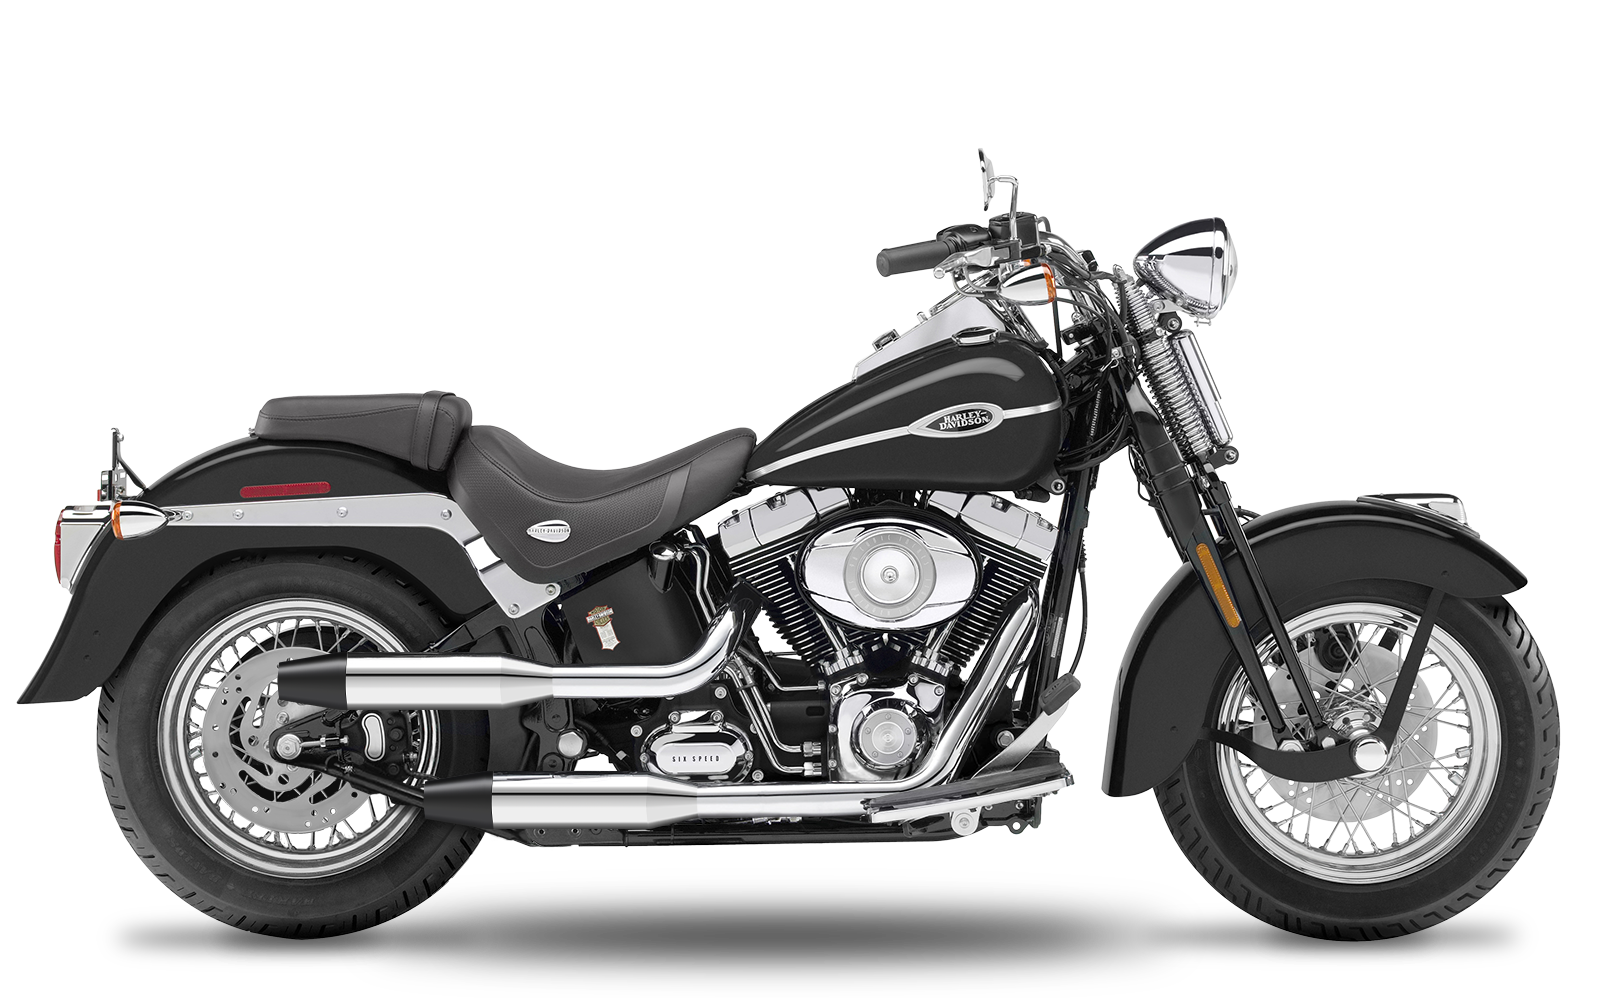 CRUISER/SOFTAIL - Springer Classic - TC88 - 2000-2006 - Complete systems adjustable